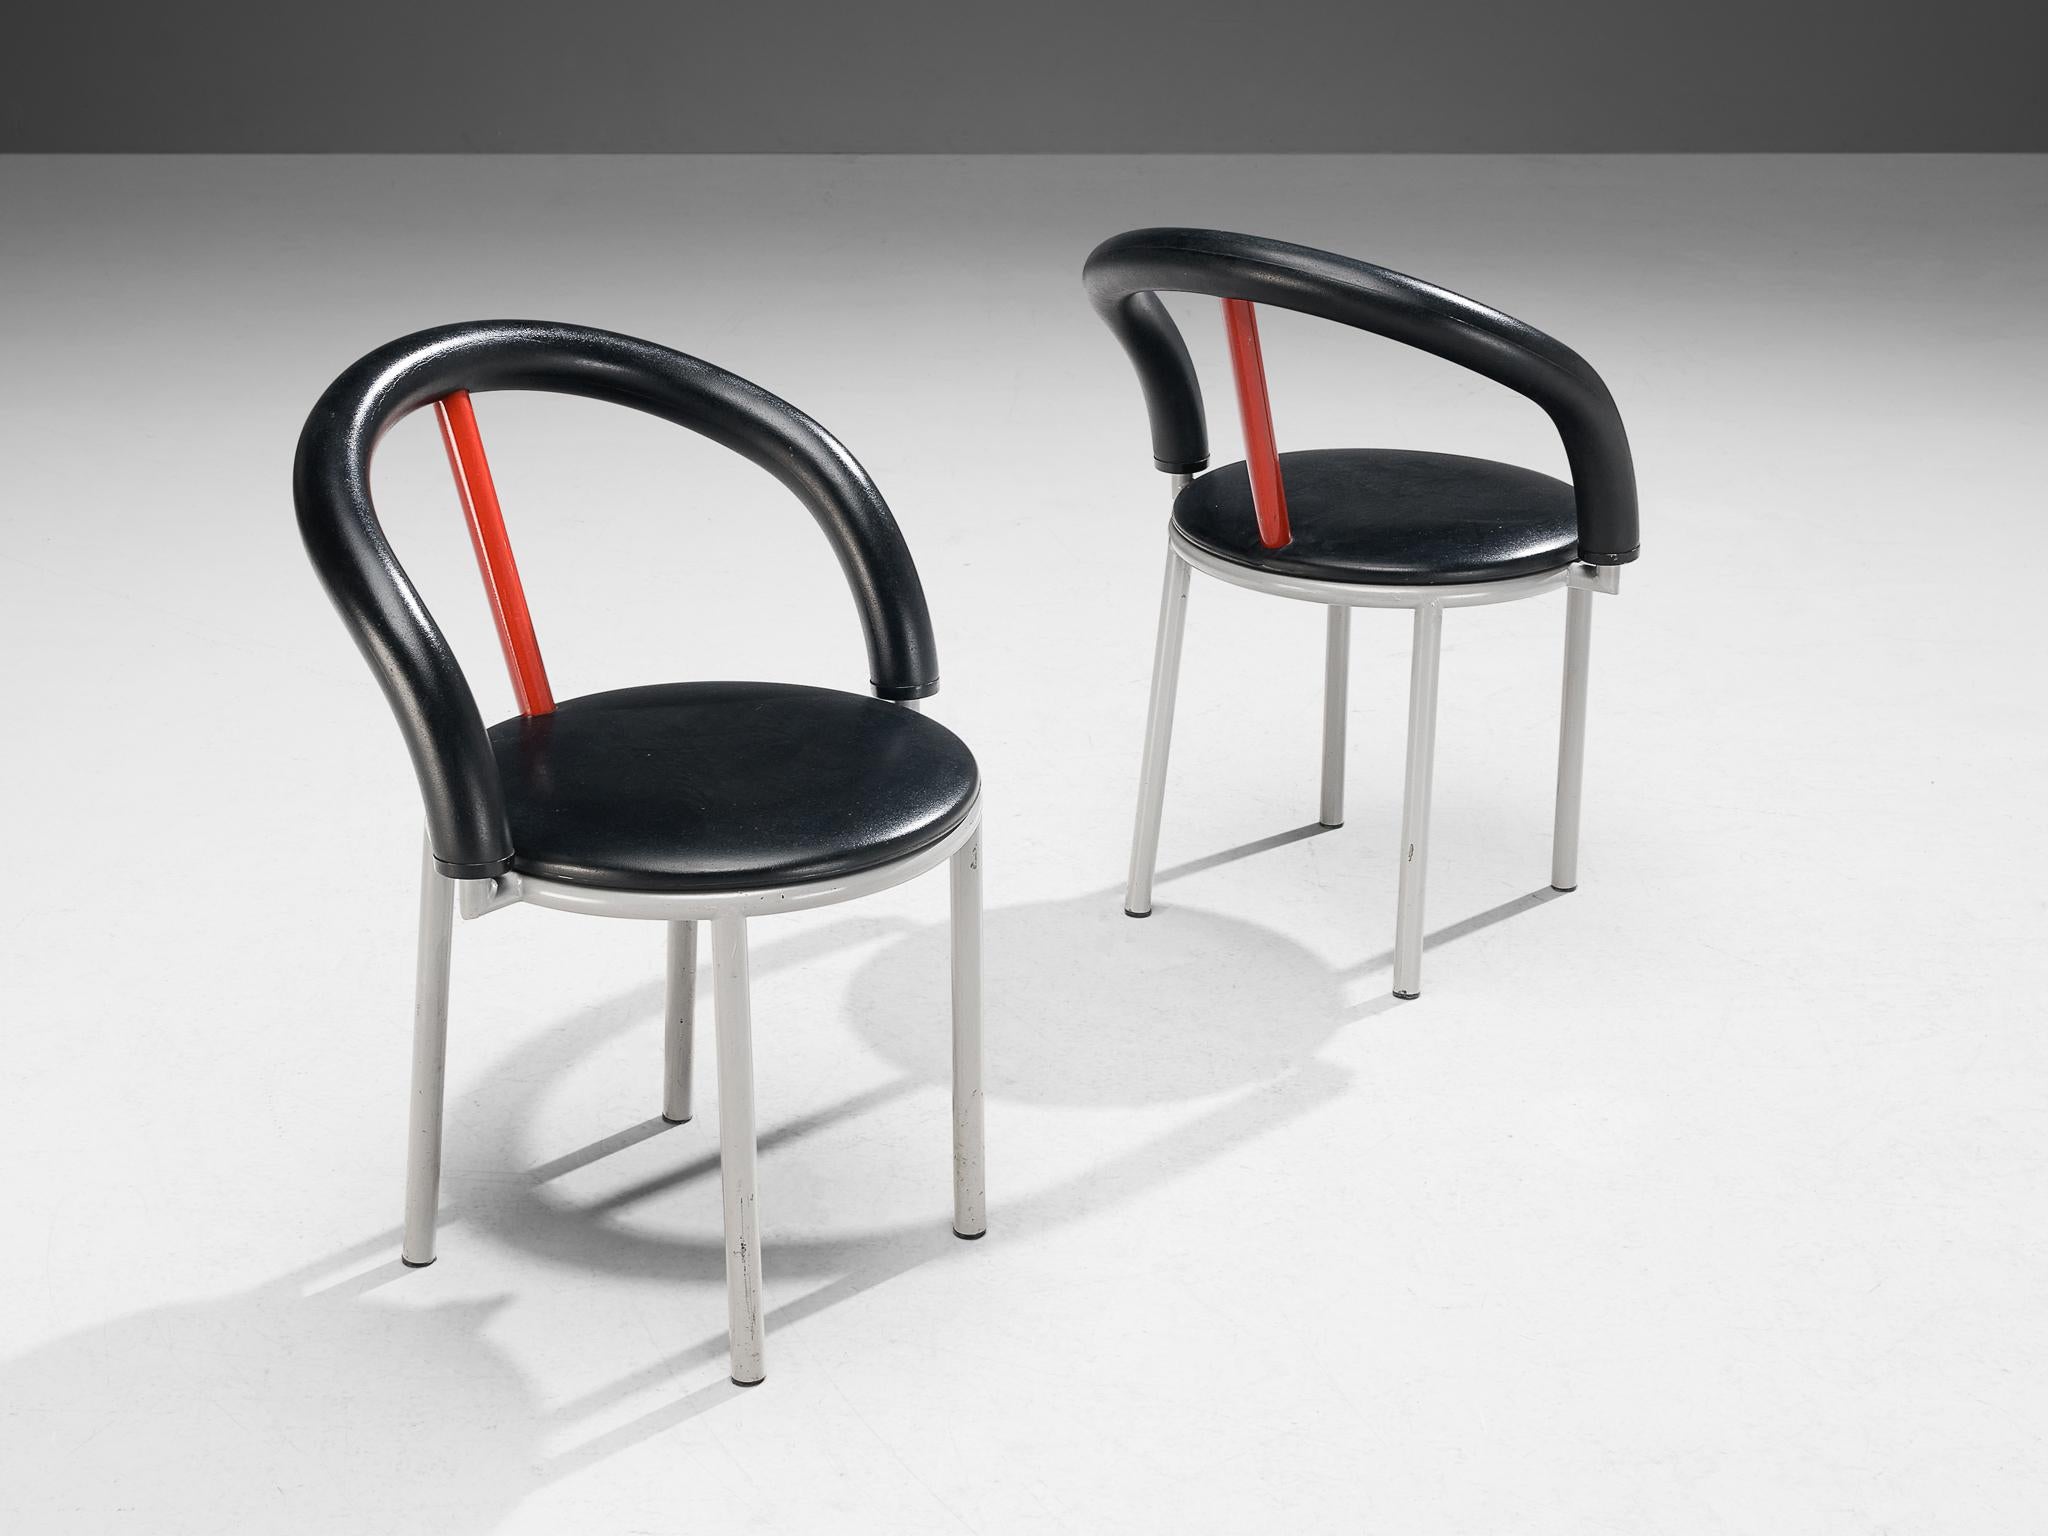 Anna Anselmi for Bieffeplast, pair of 'Alpha' dining chairs, rubber, lacquered metal, Italy, 1985

These armchairs are characterized by an unusual aesthetics that are created during the postmodern era in Italy. The backrest smoothly runs over into